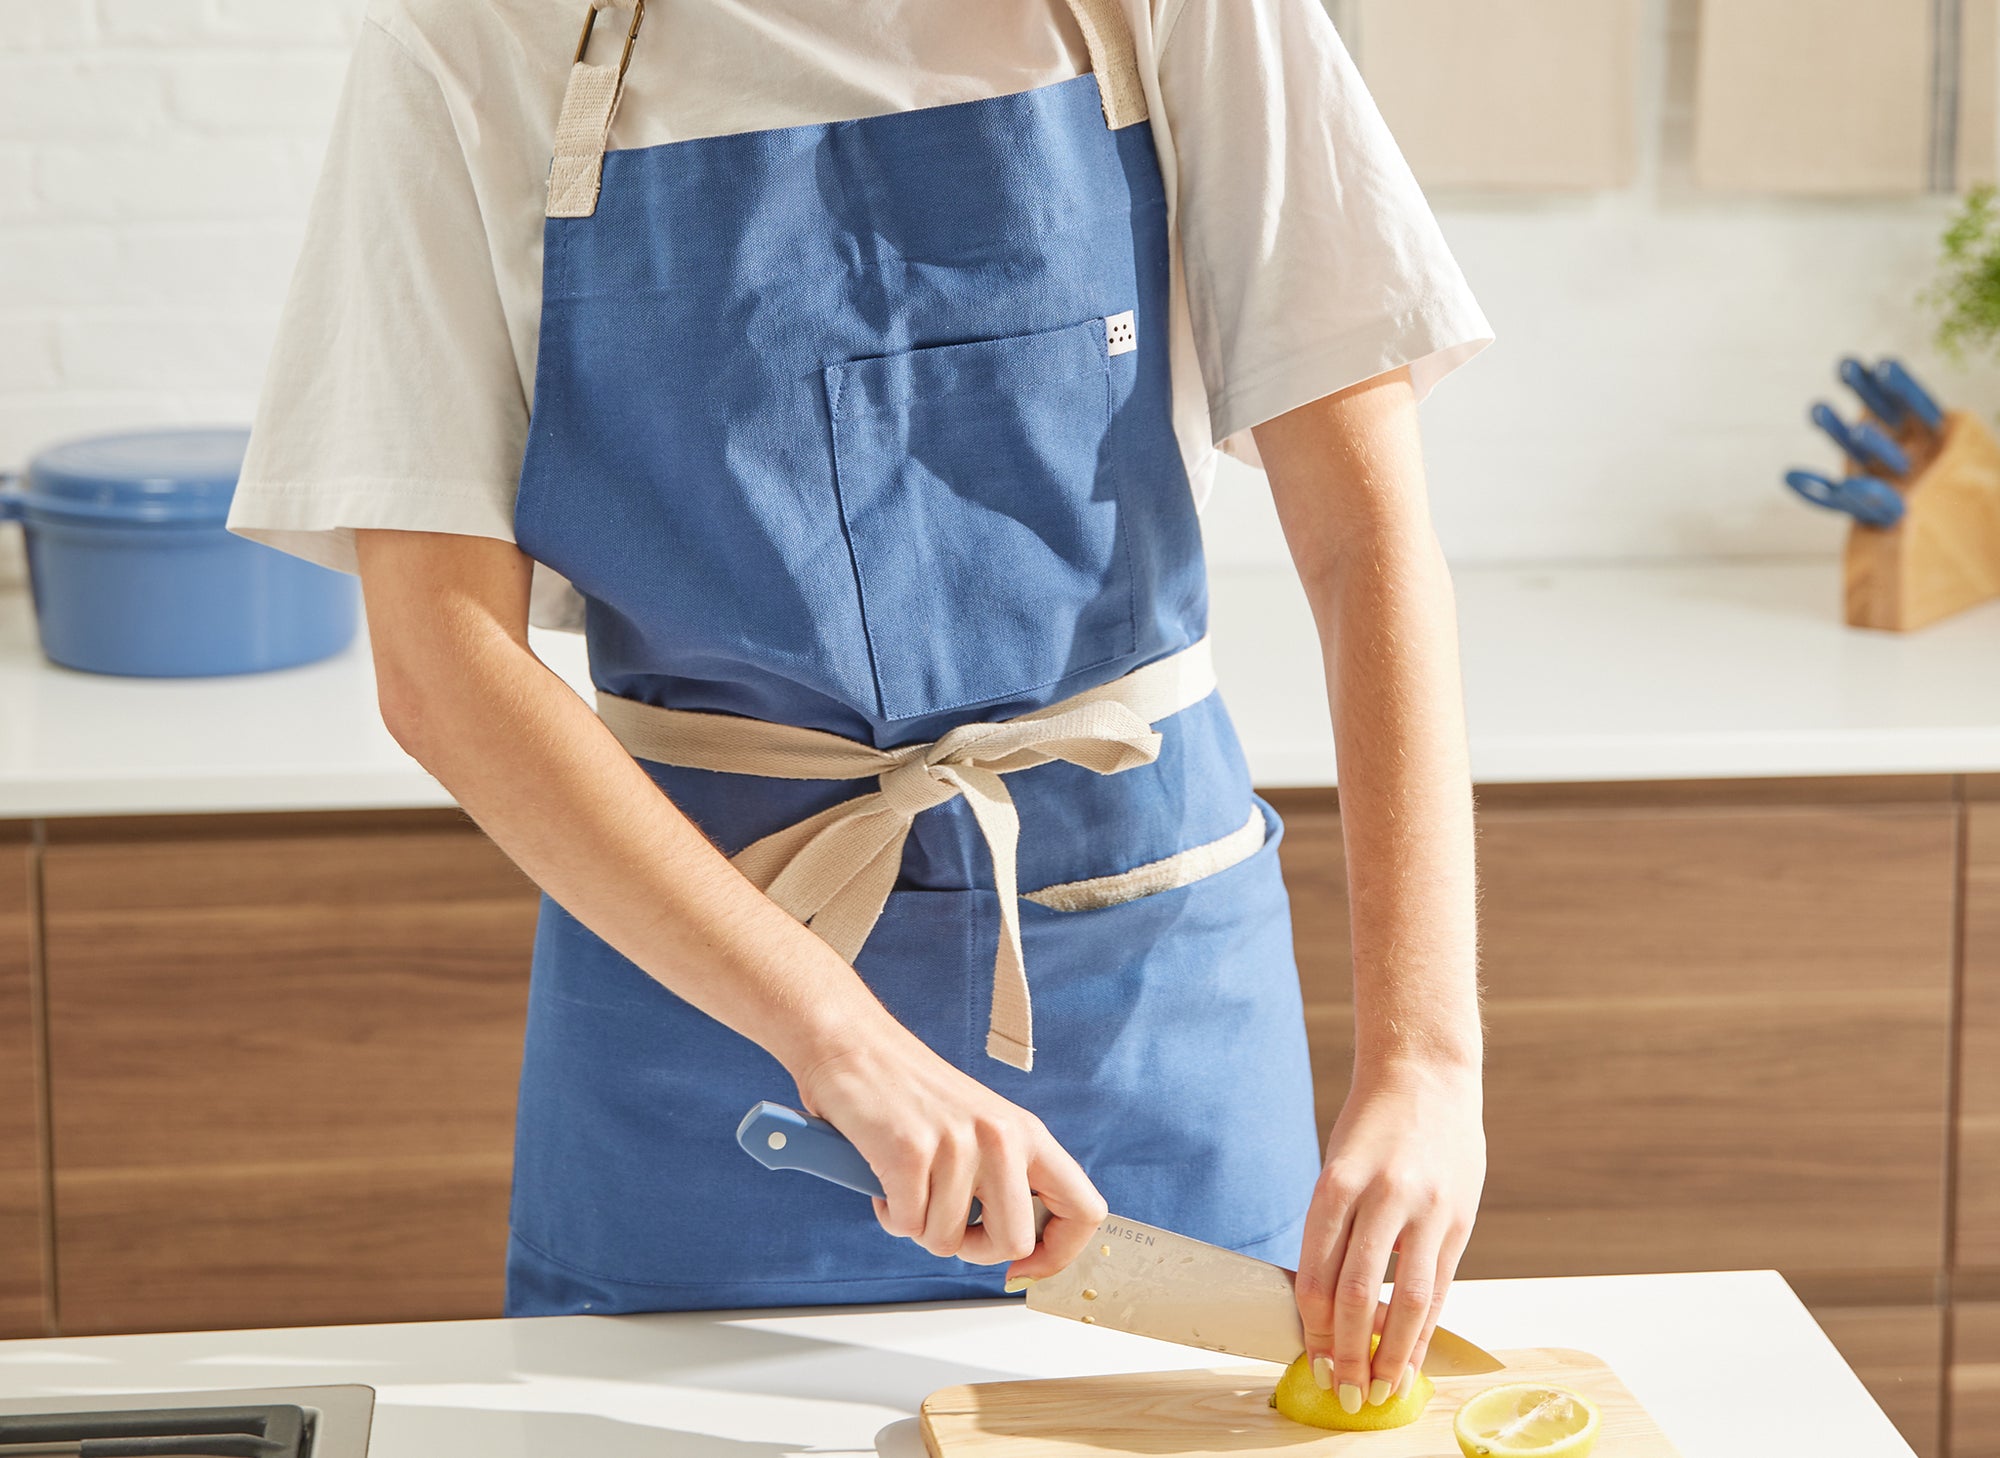 A headless chef wearing a blue Misen apron uses a blue Misen Chef’s Knife to slice lemons on a wood cutting board in a kitchen.